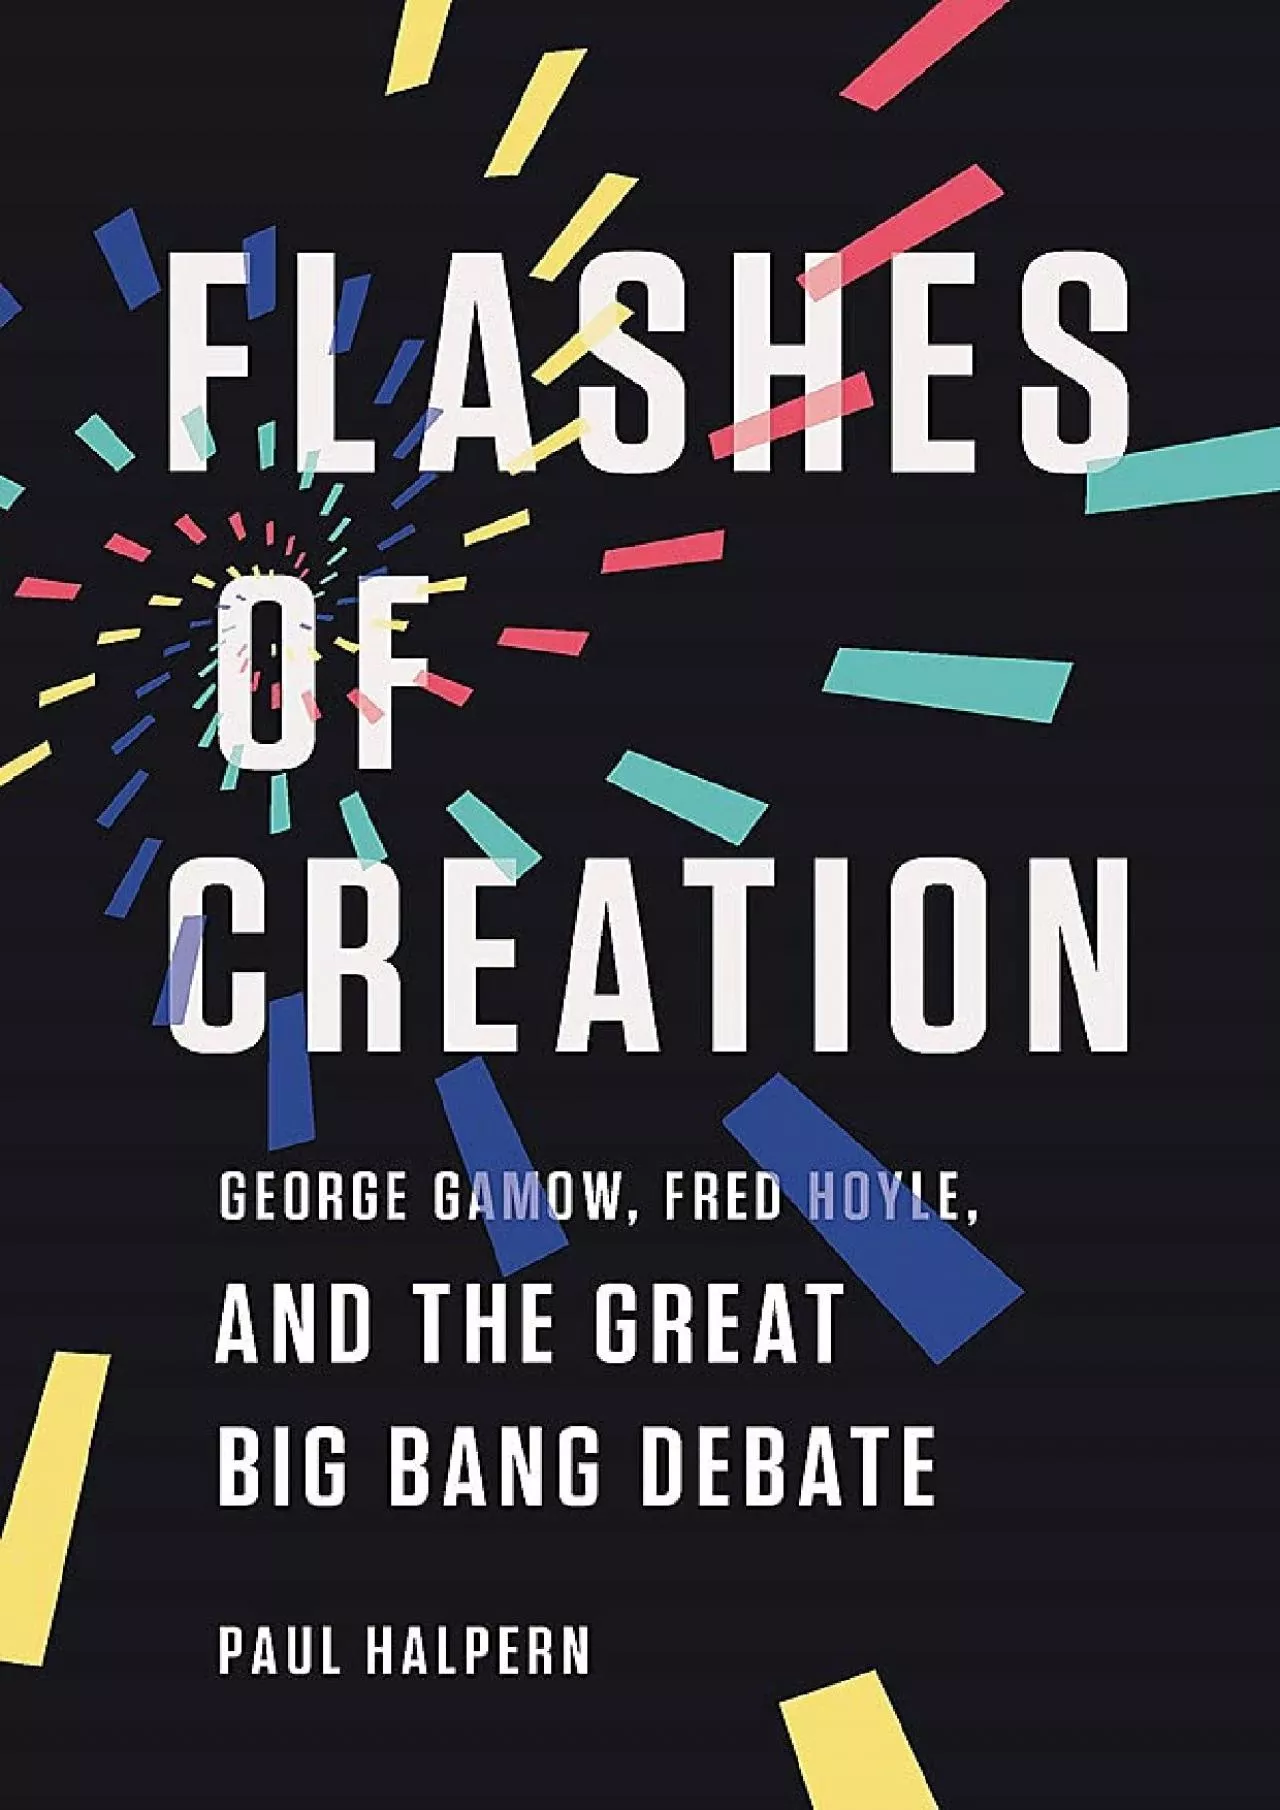 (BOOK)-Flashes of Creation: George Gamow, Fred Hoyle, and the Great Big Bang Debate